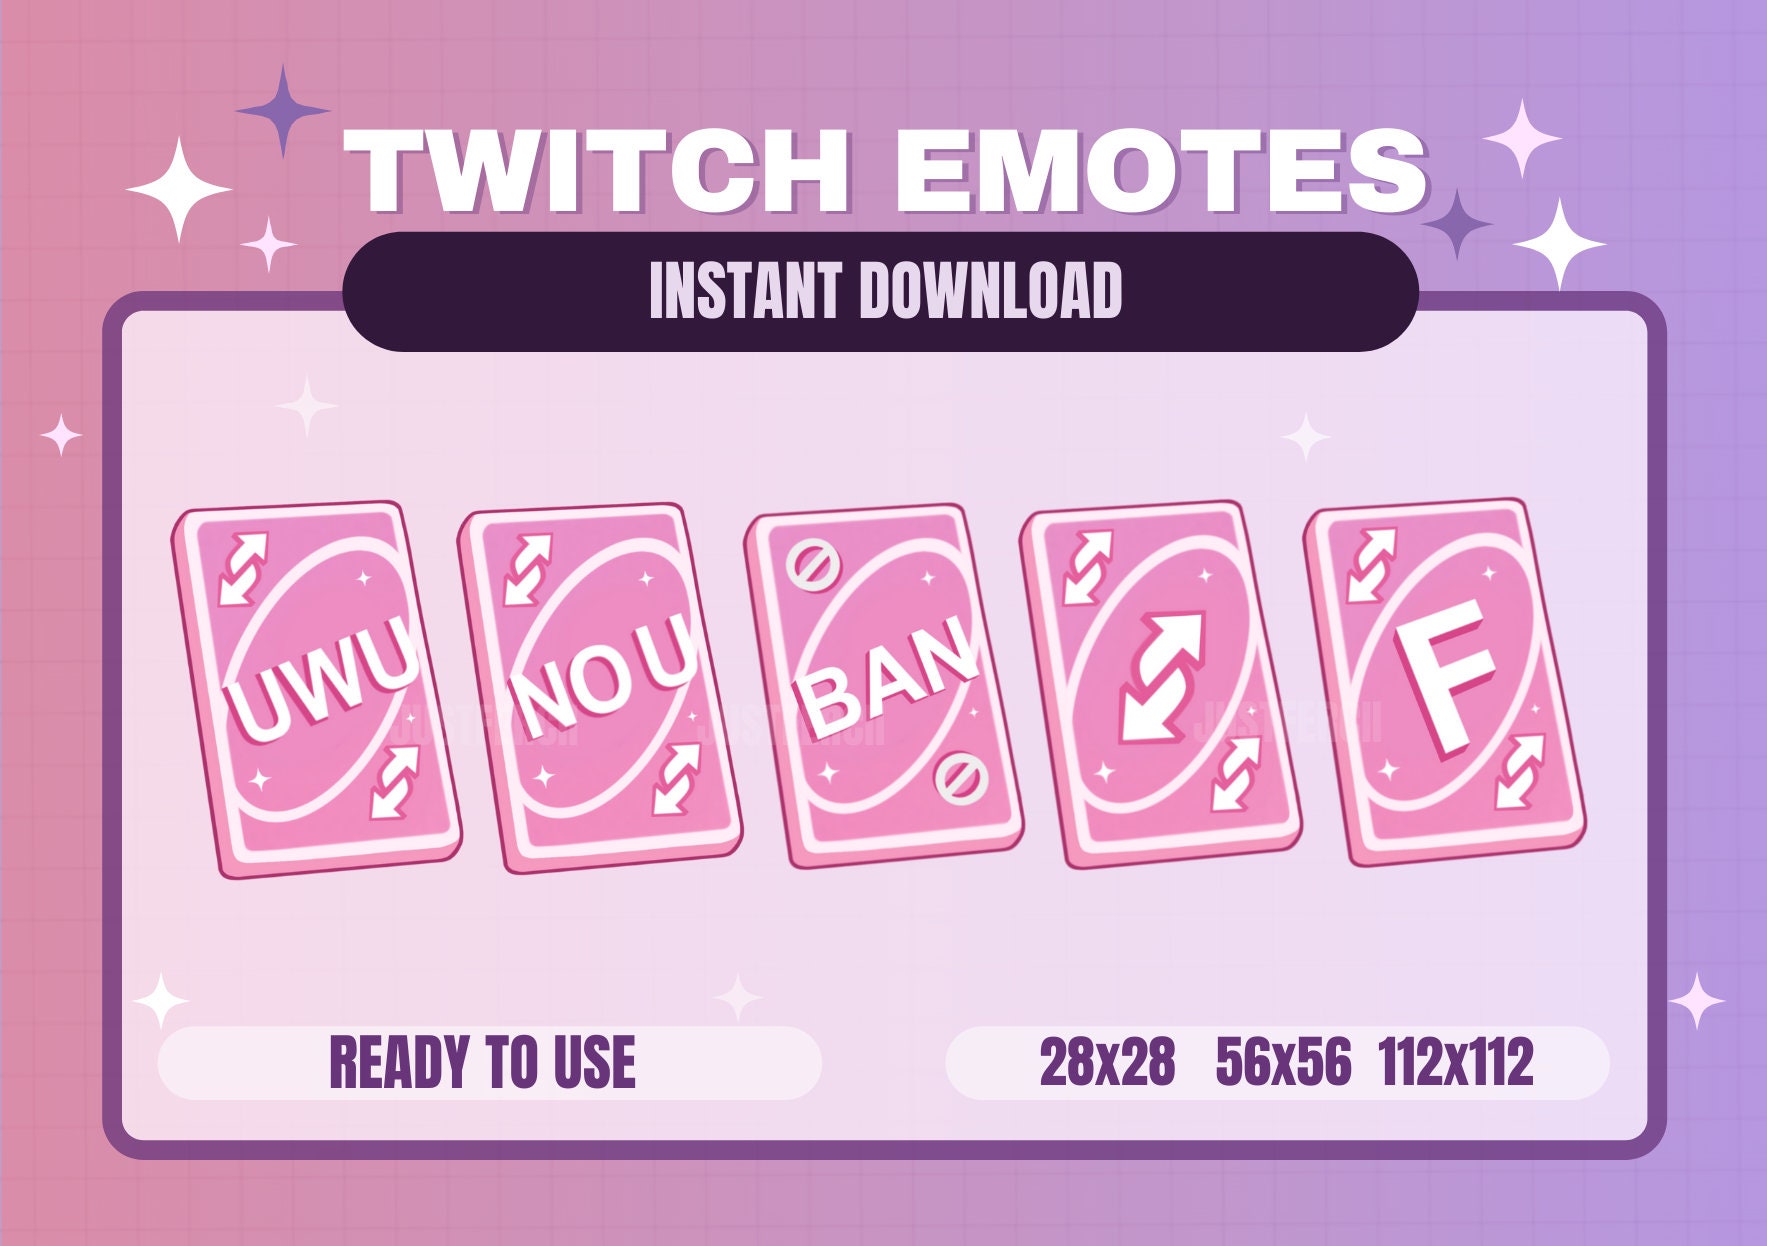 ANIMATED Uno Reverse Card Twitch Emote / Pink Card Emote / 